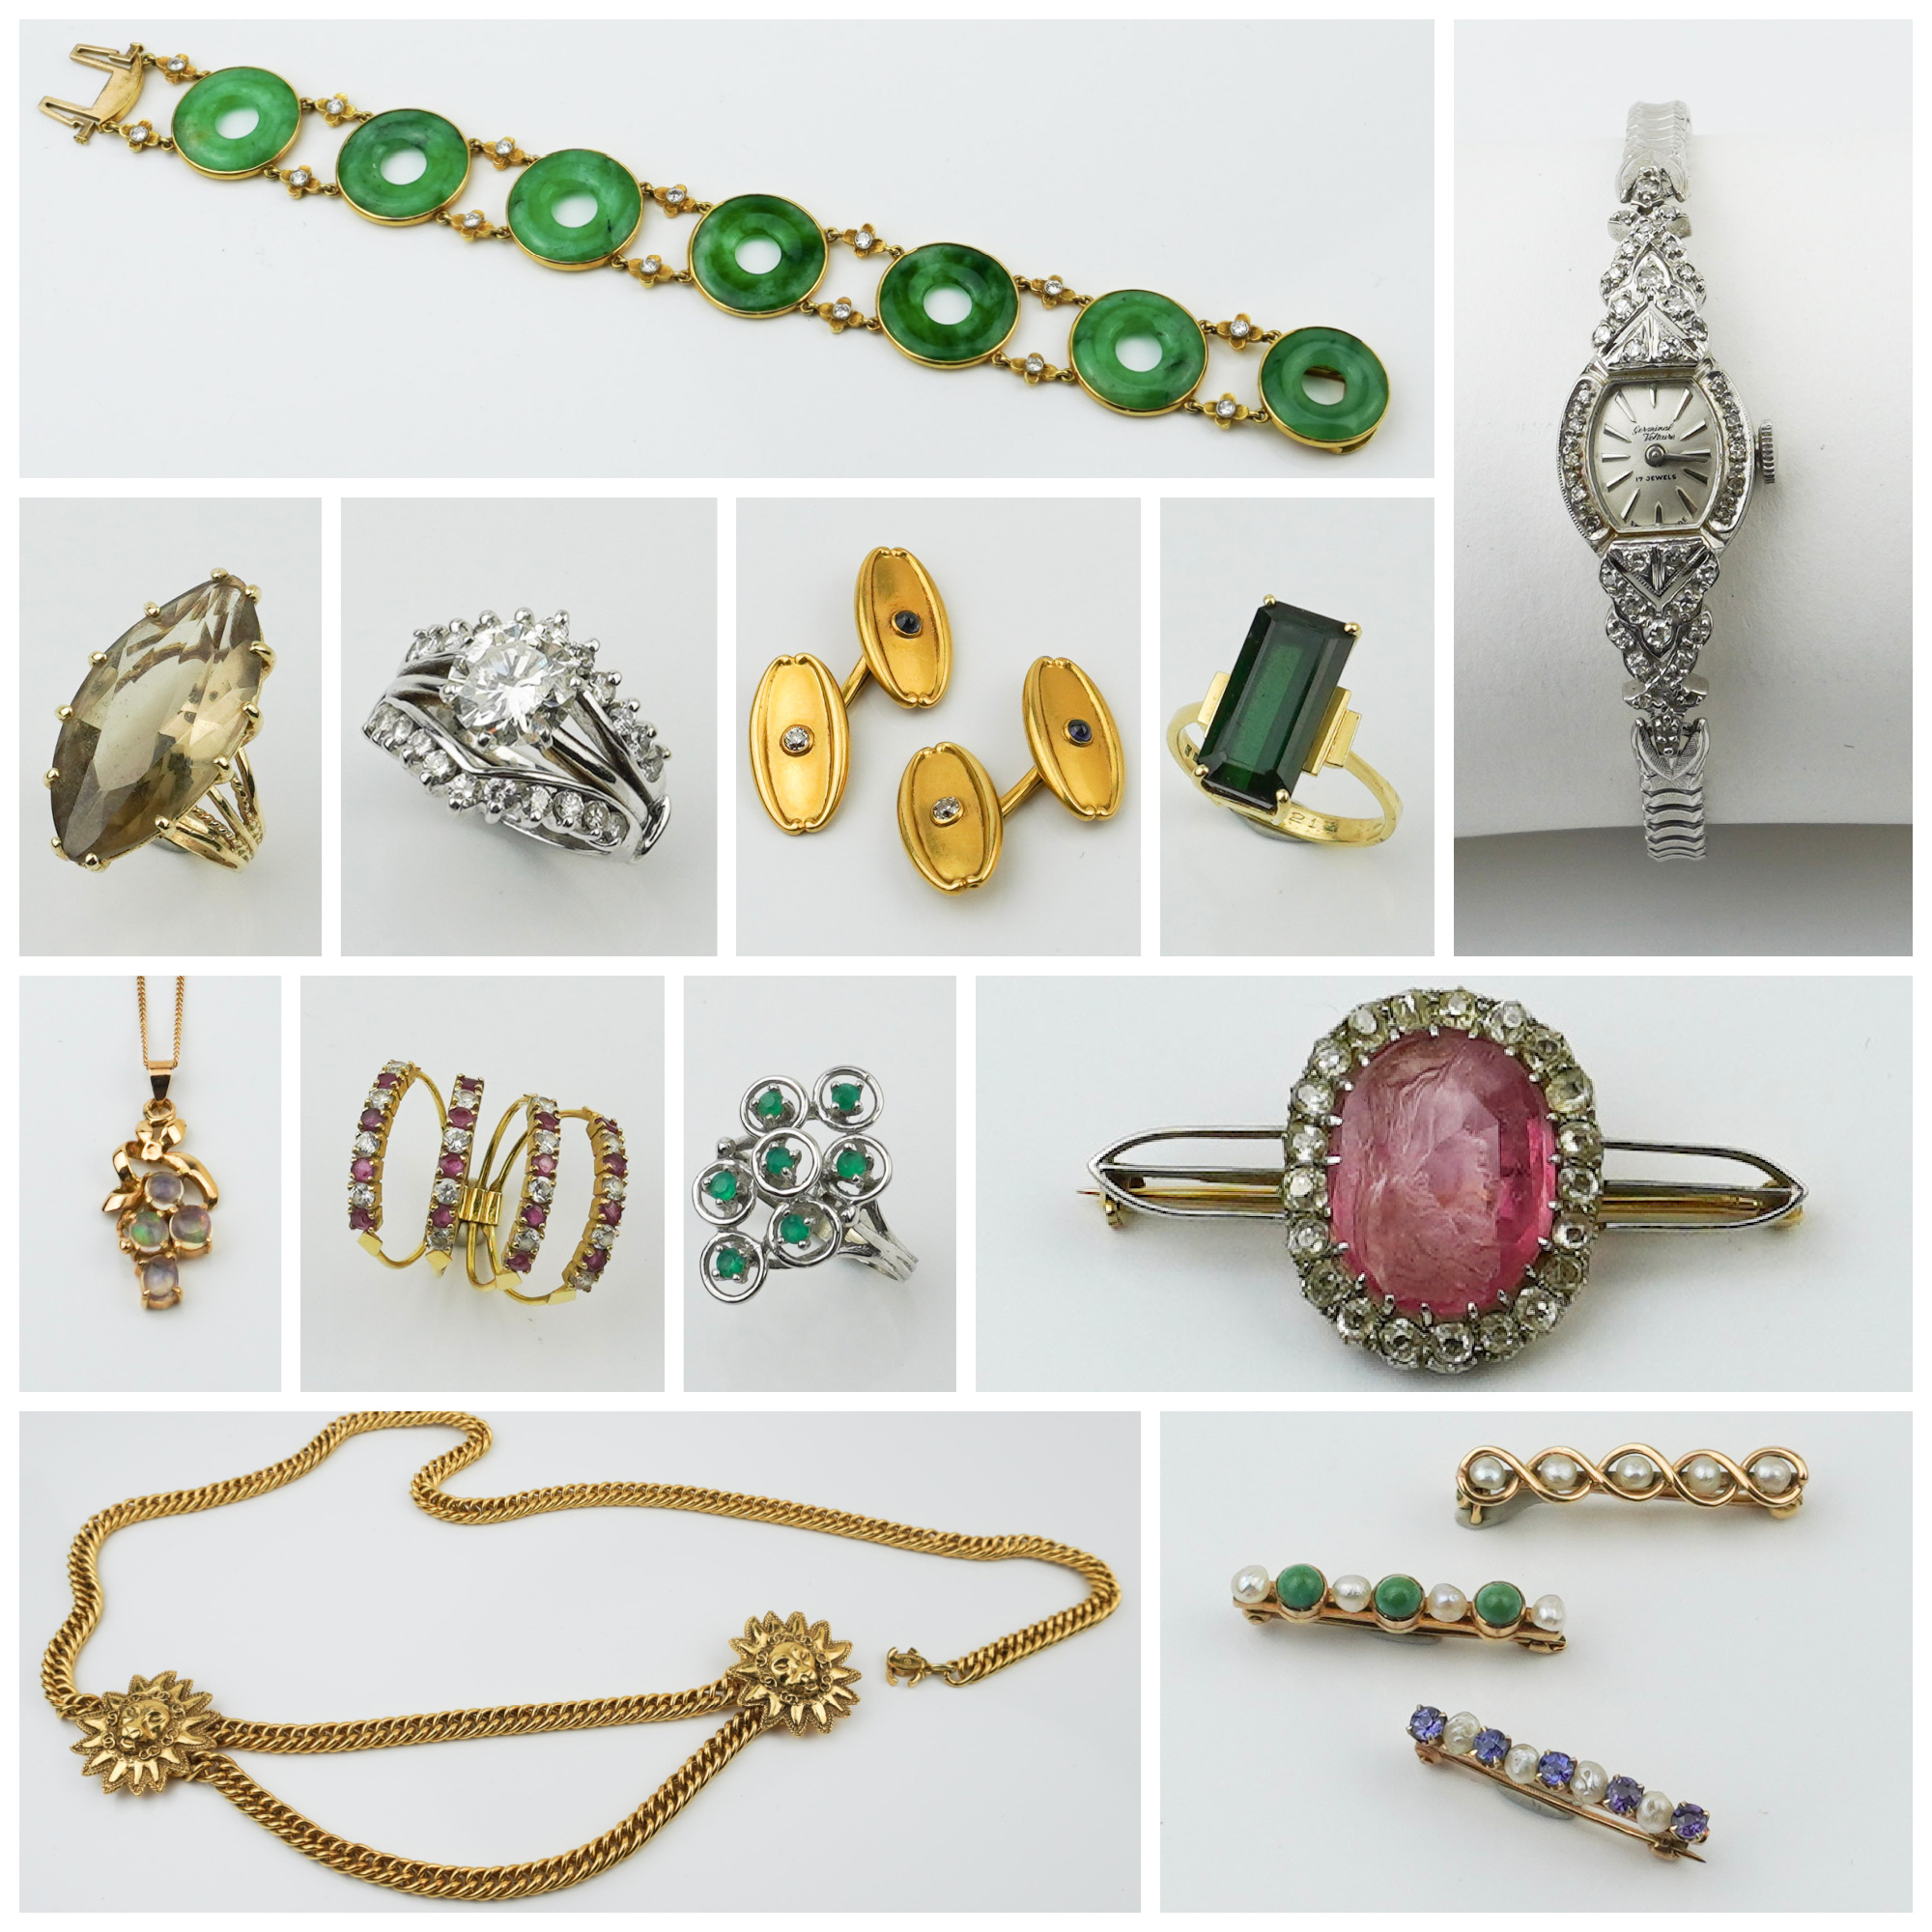 March Fine Jewelry Auction